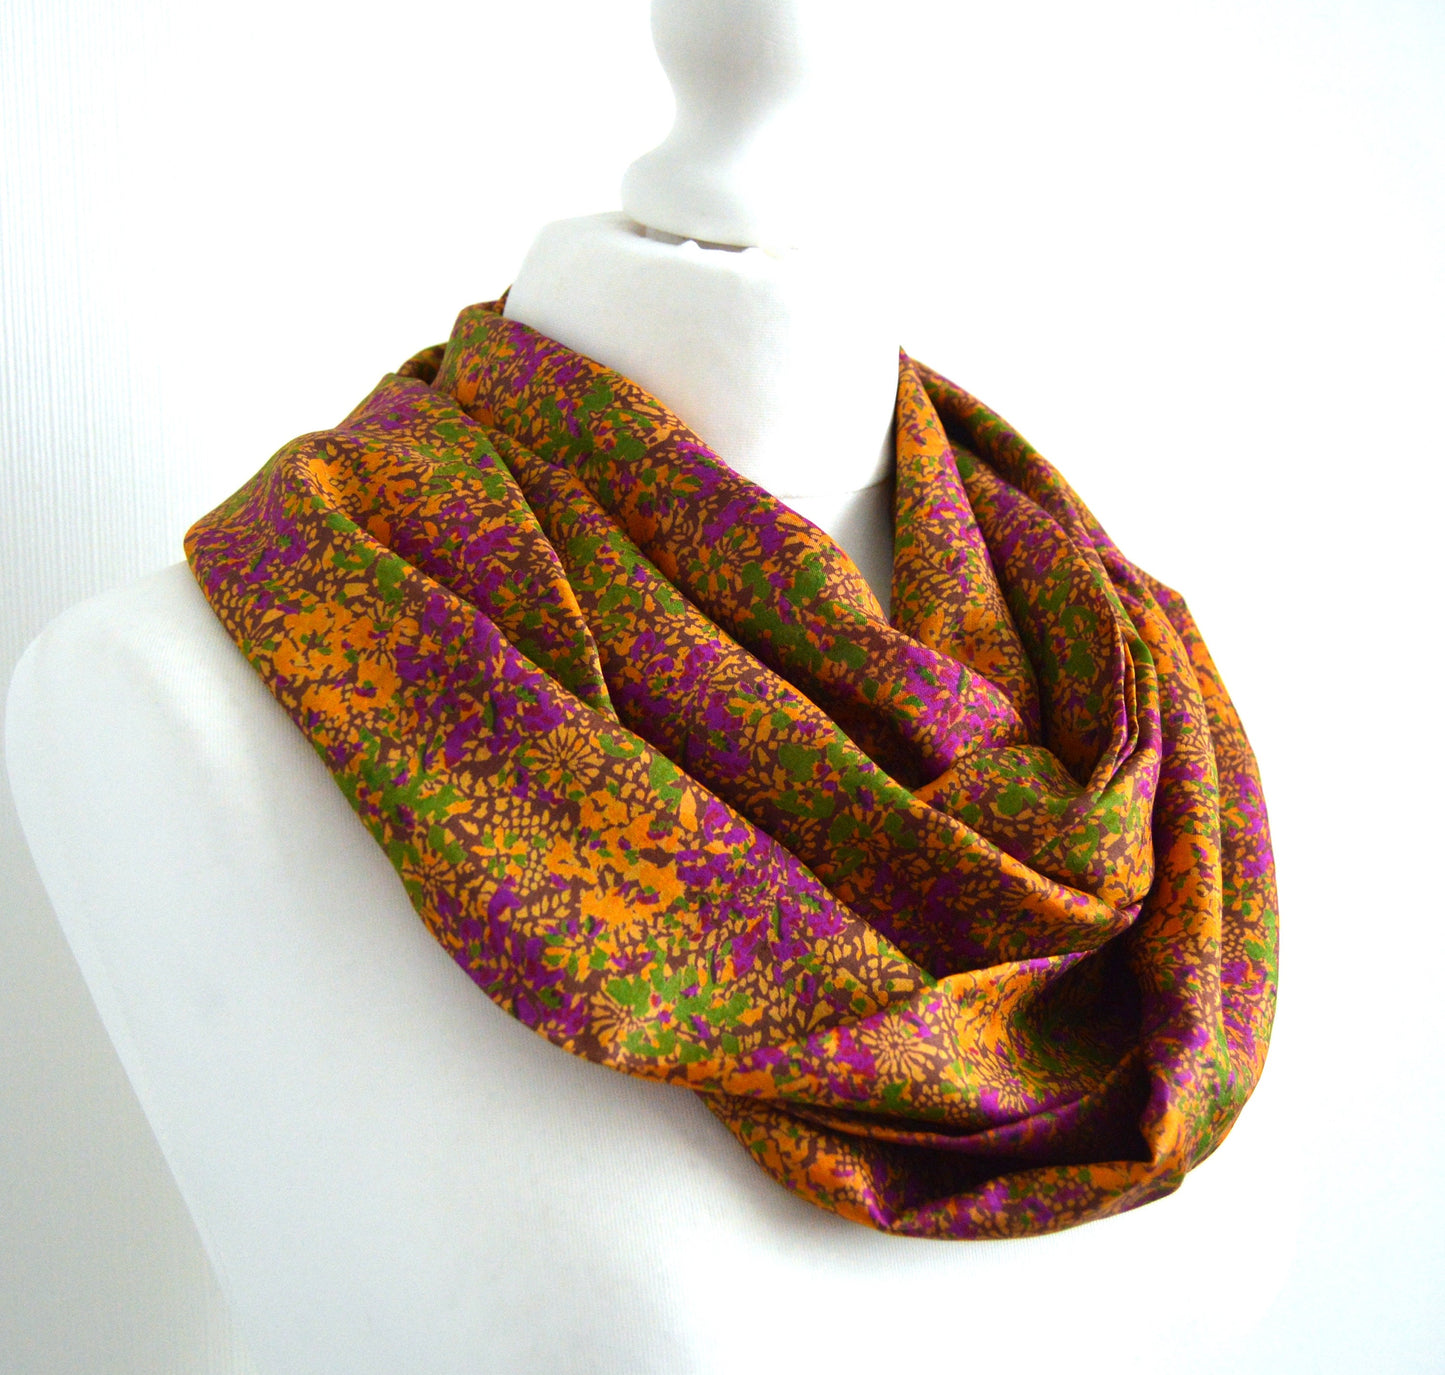 Ochre/Mustard Cerise Green Upcycled Vintage Sari Silk Scarf - Sophisticated Boho Eco Friendly Womens Scarf - Unique Christmas Gift for Her